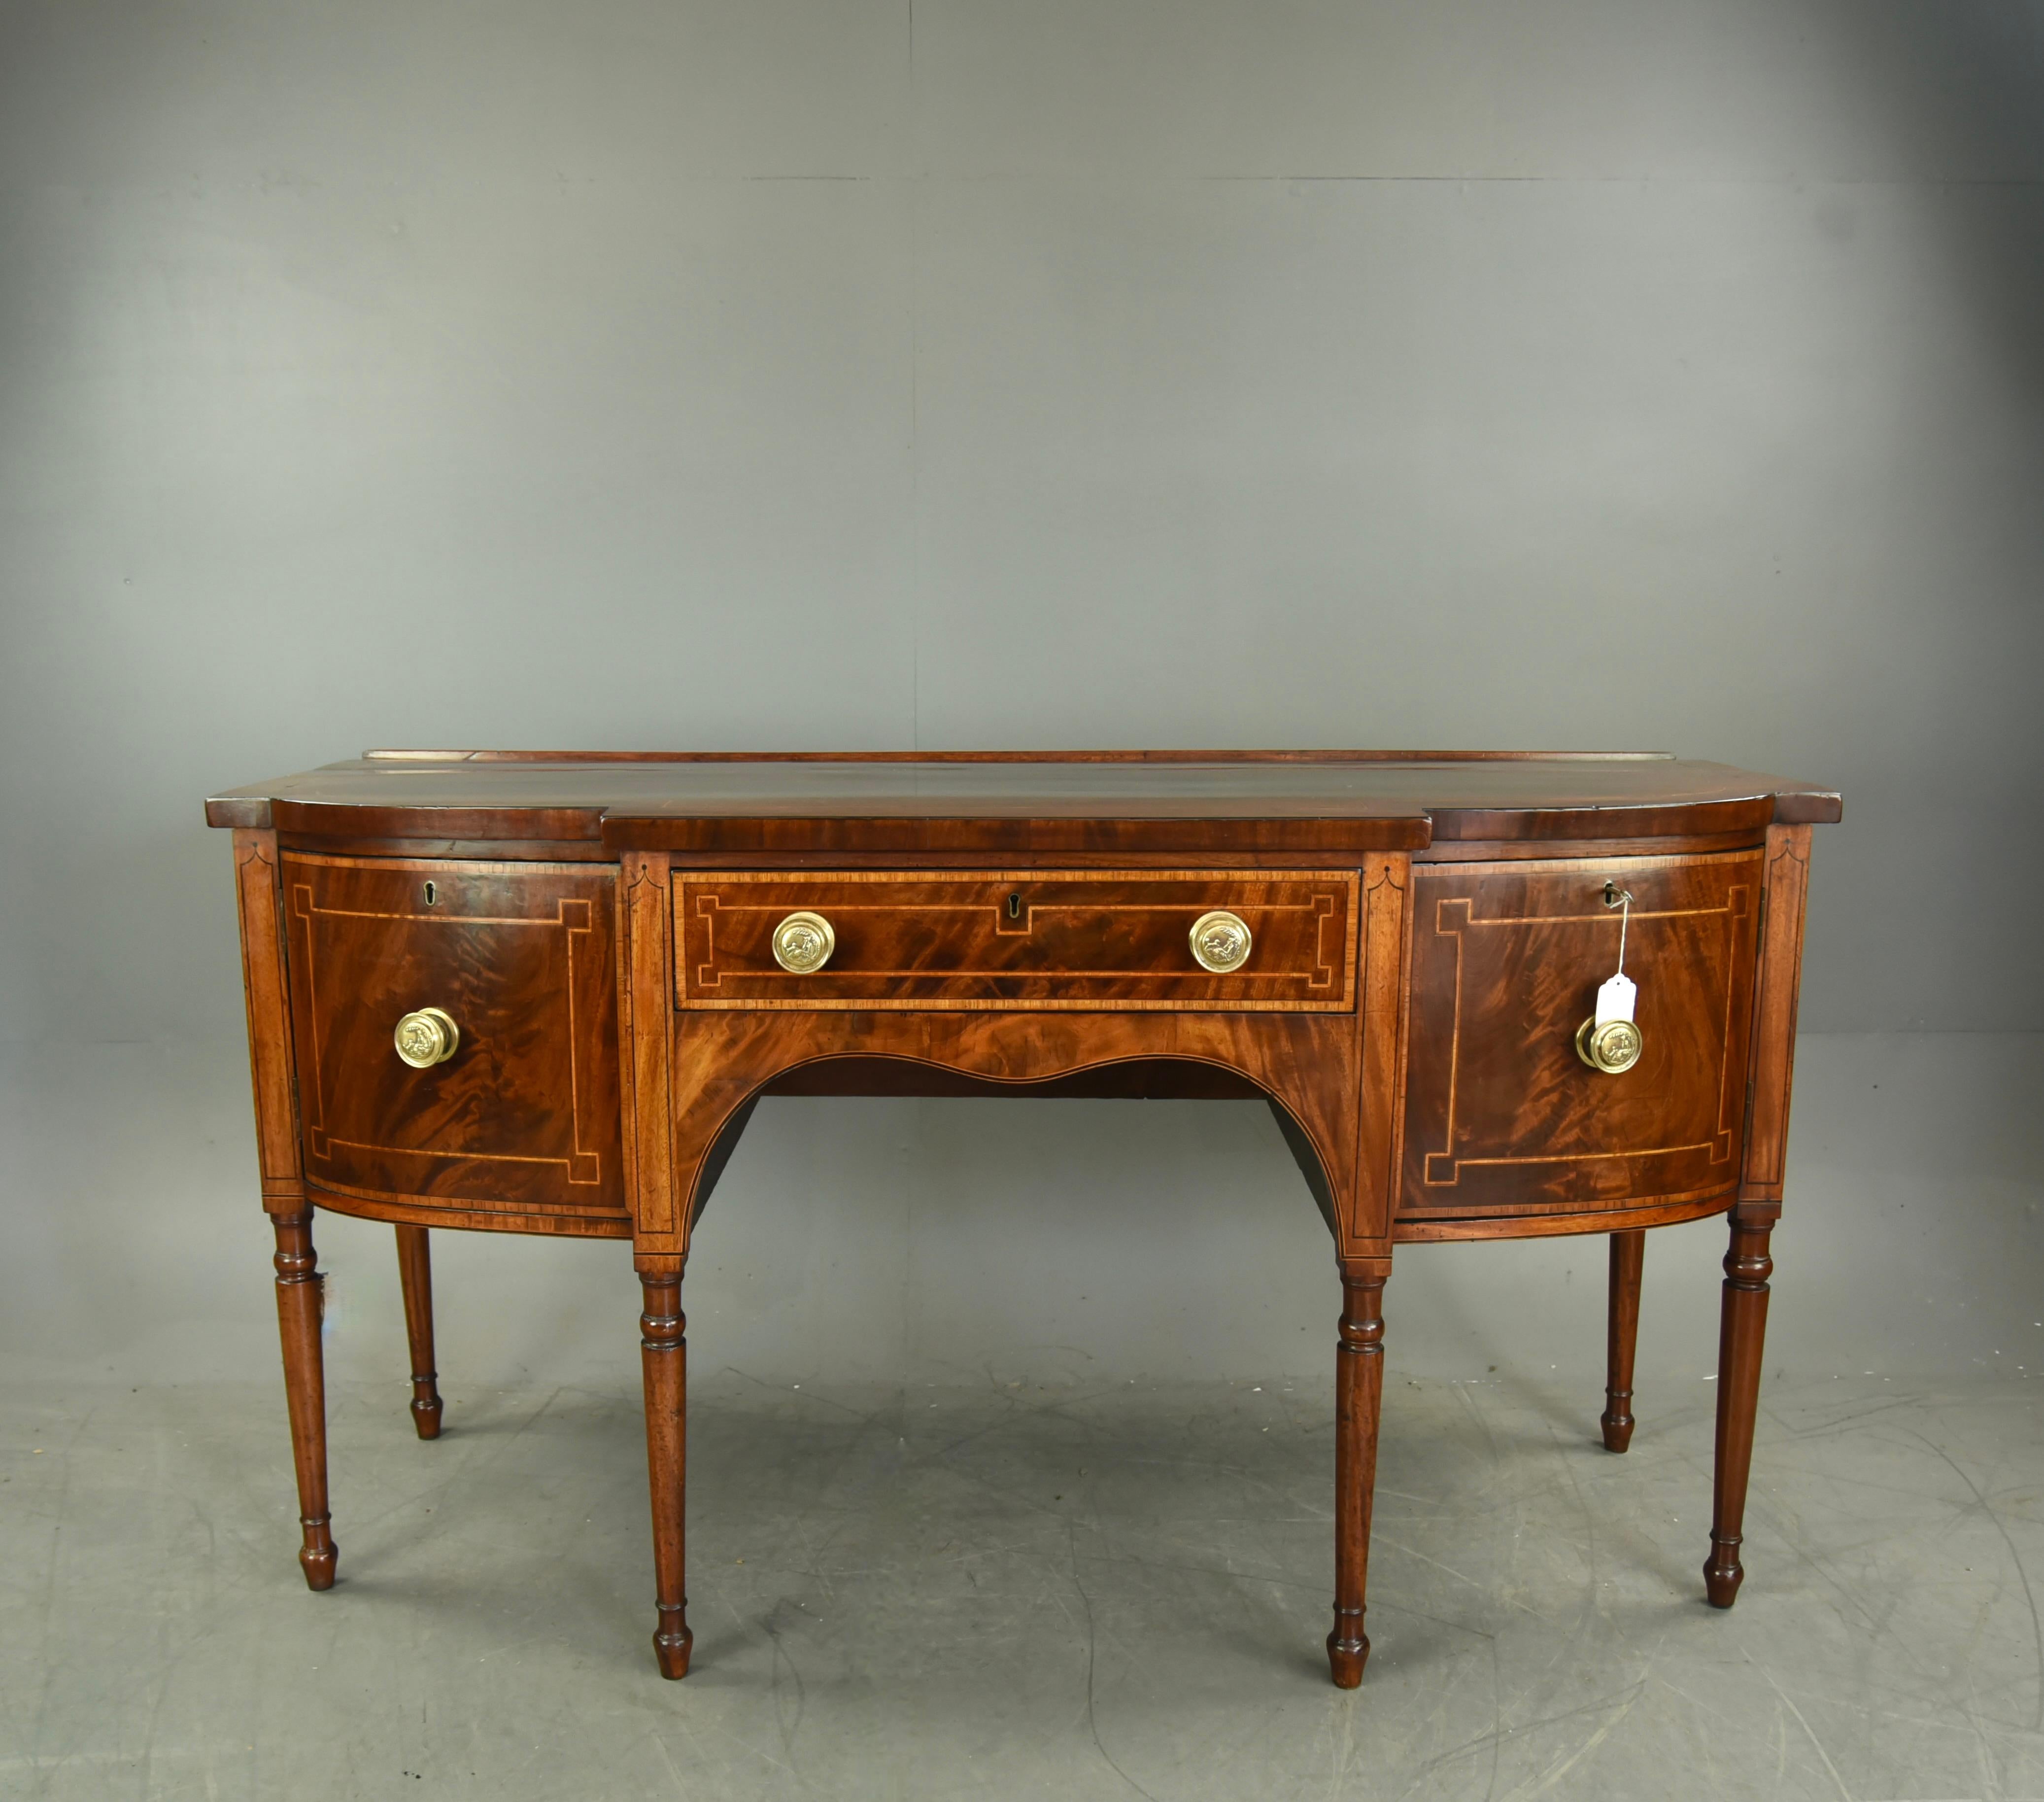 Fine quality Georgian mahogany sideboard circa 1800 .
The sideboard is a great colour with good figuring .and has line inlay detail .
The two end cupboards each have a single shelf and both have working locks with a single key .
The sideboard stands